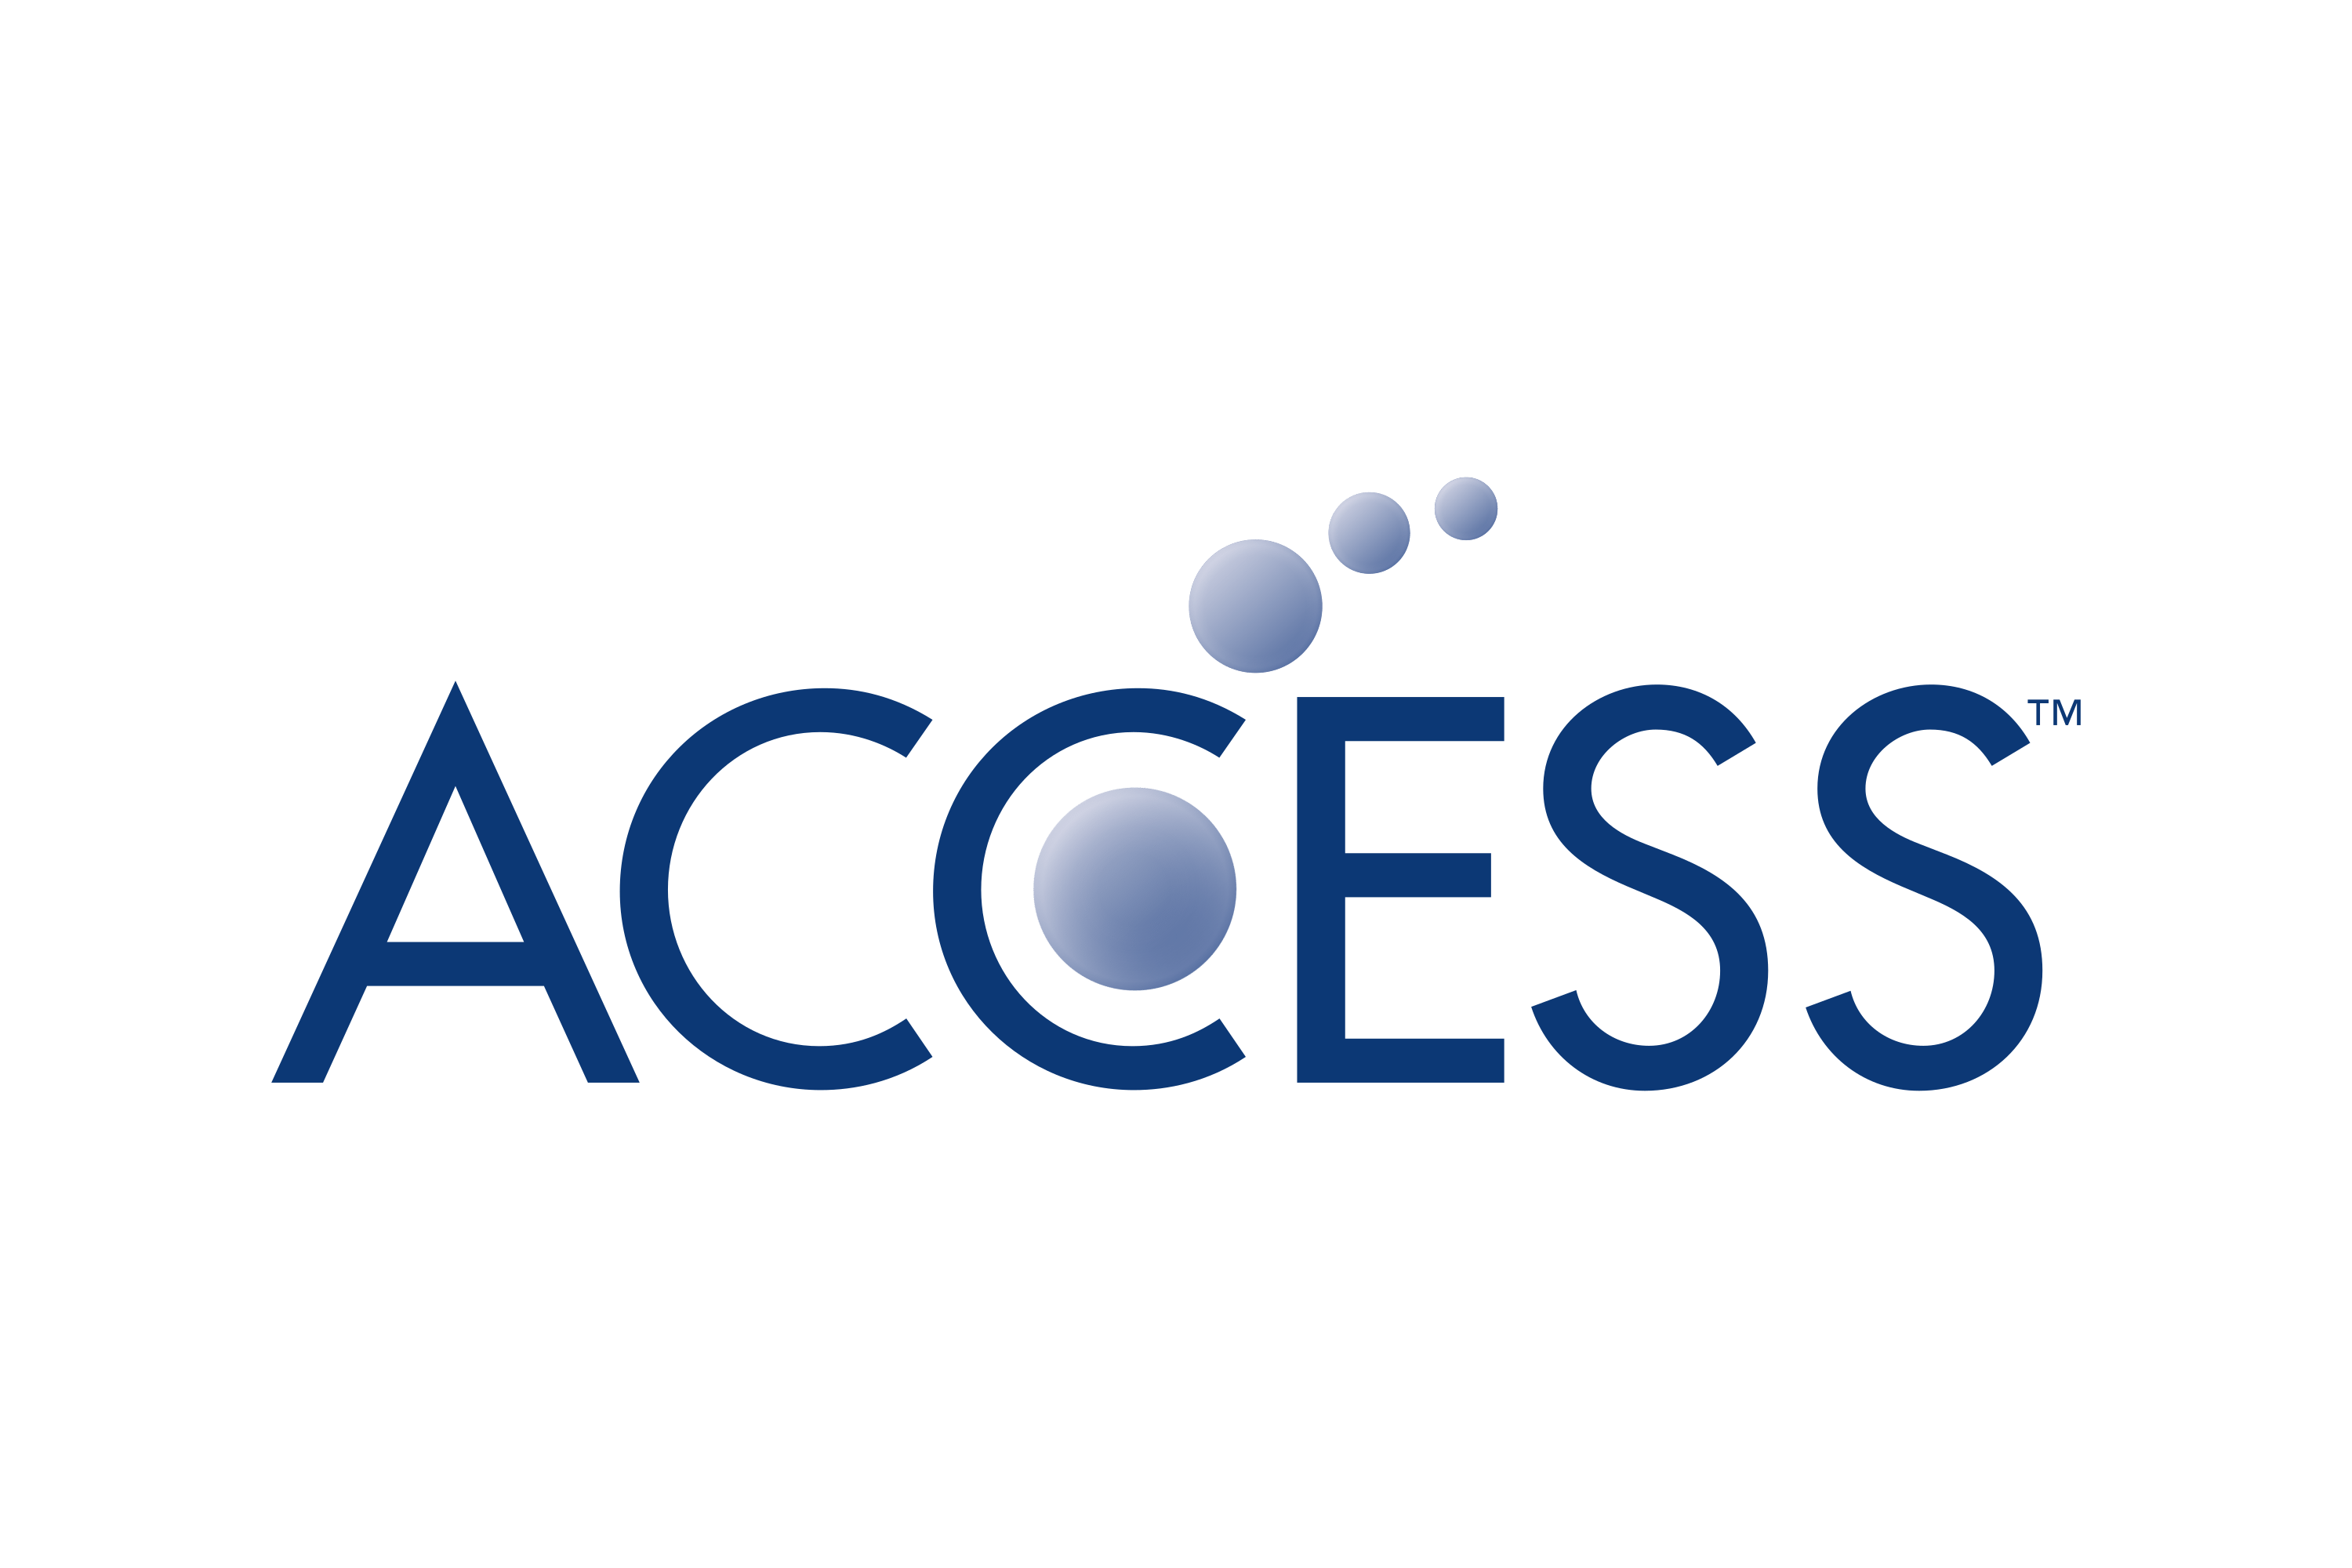 How can you write an open access encyclopedia in a closed access world? –  Diff